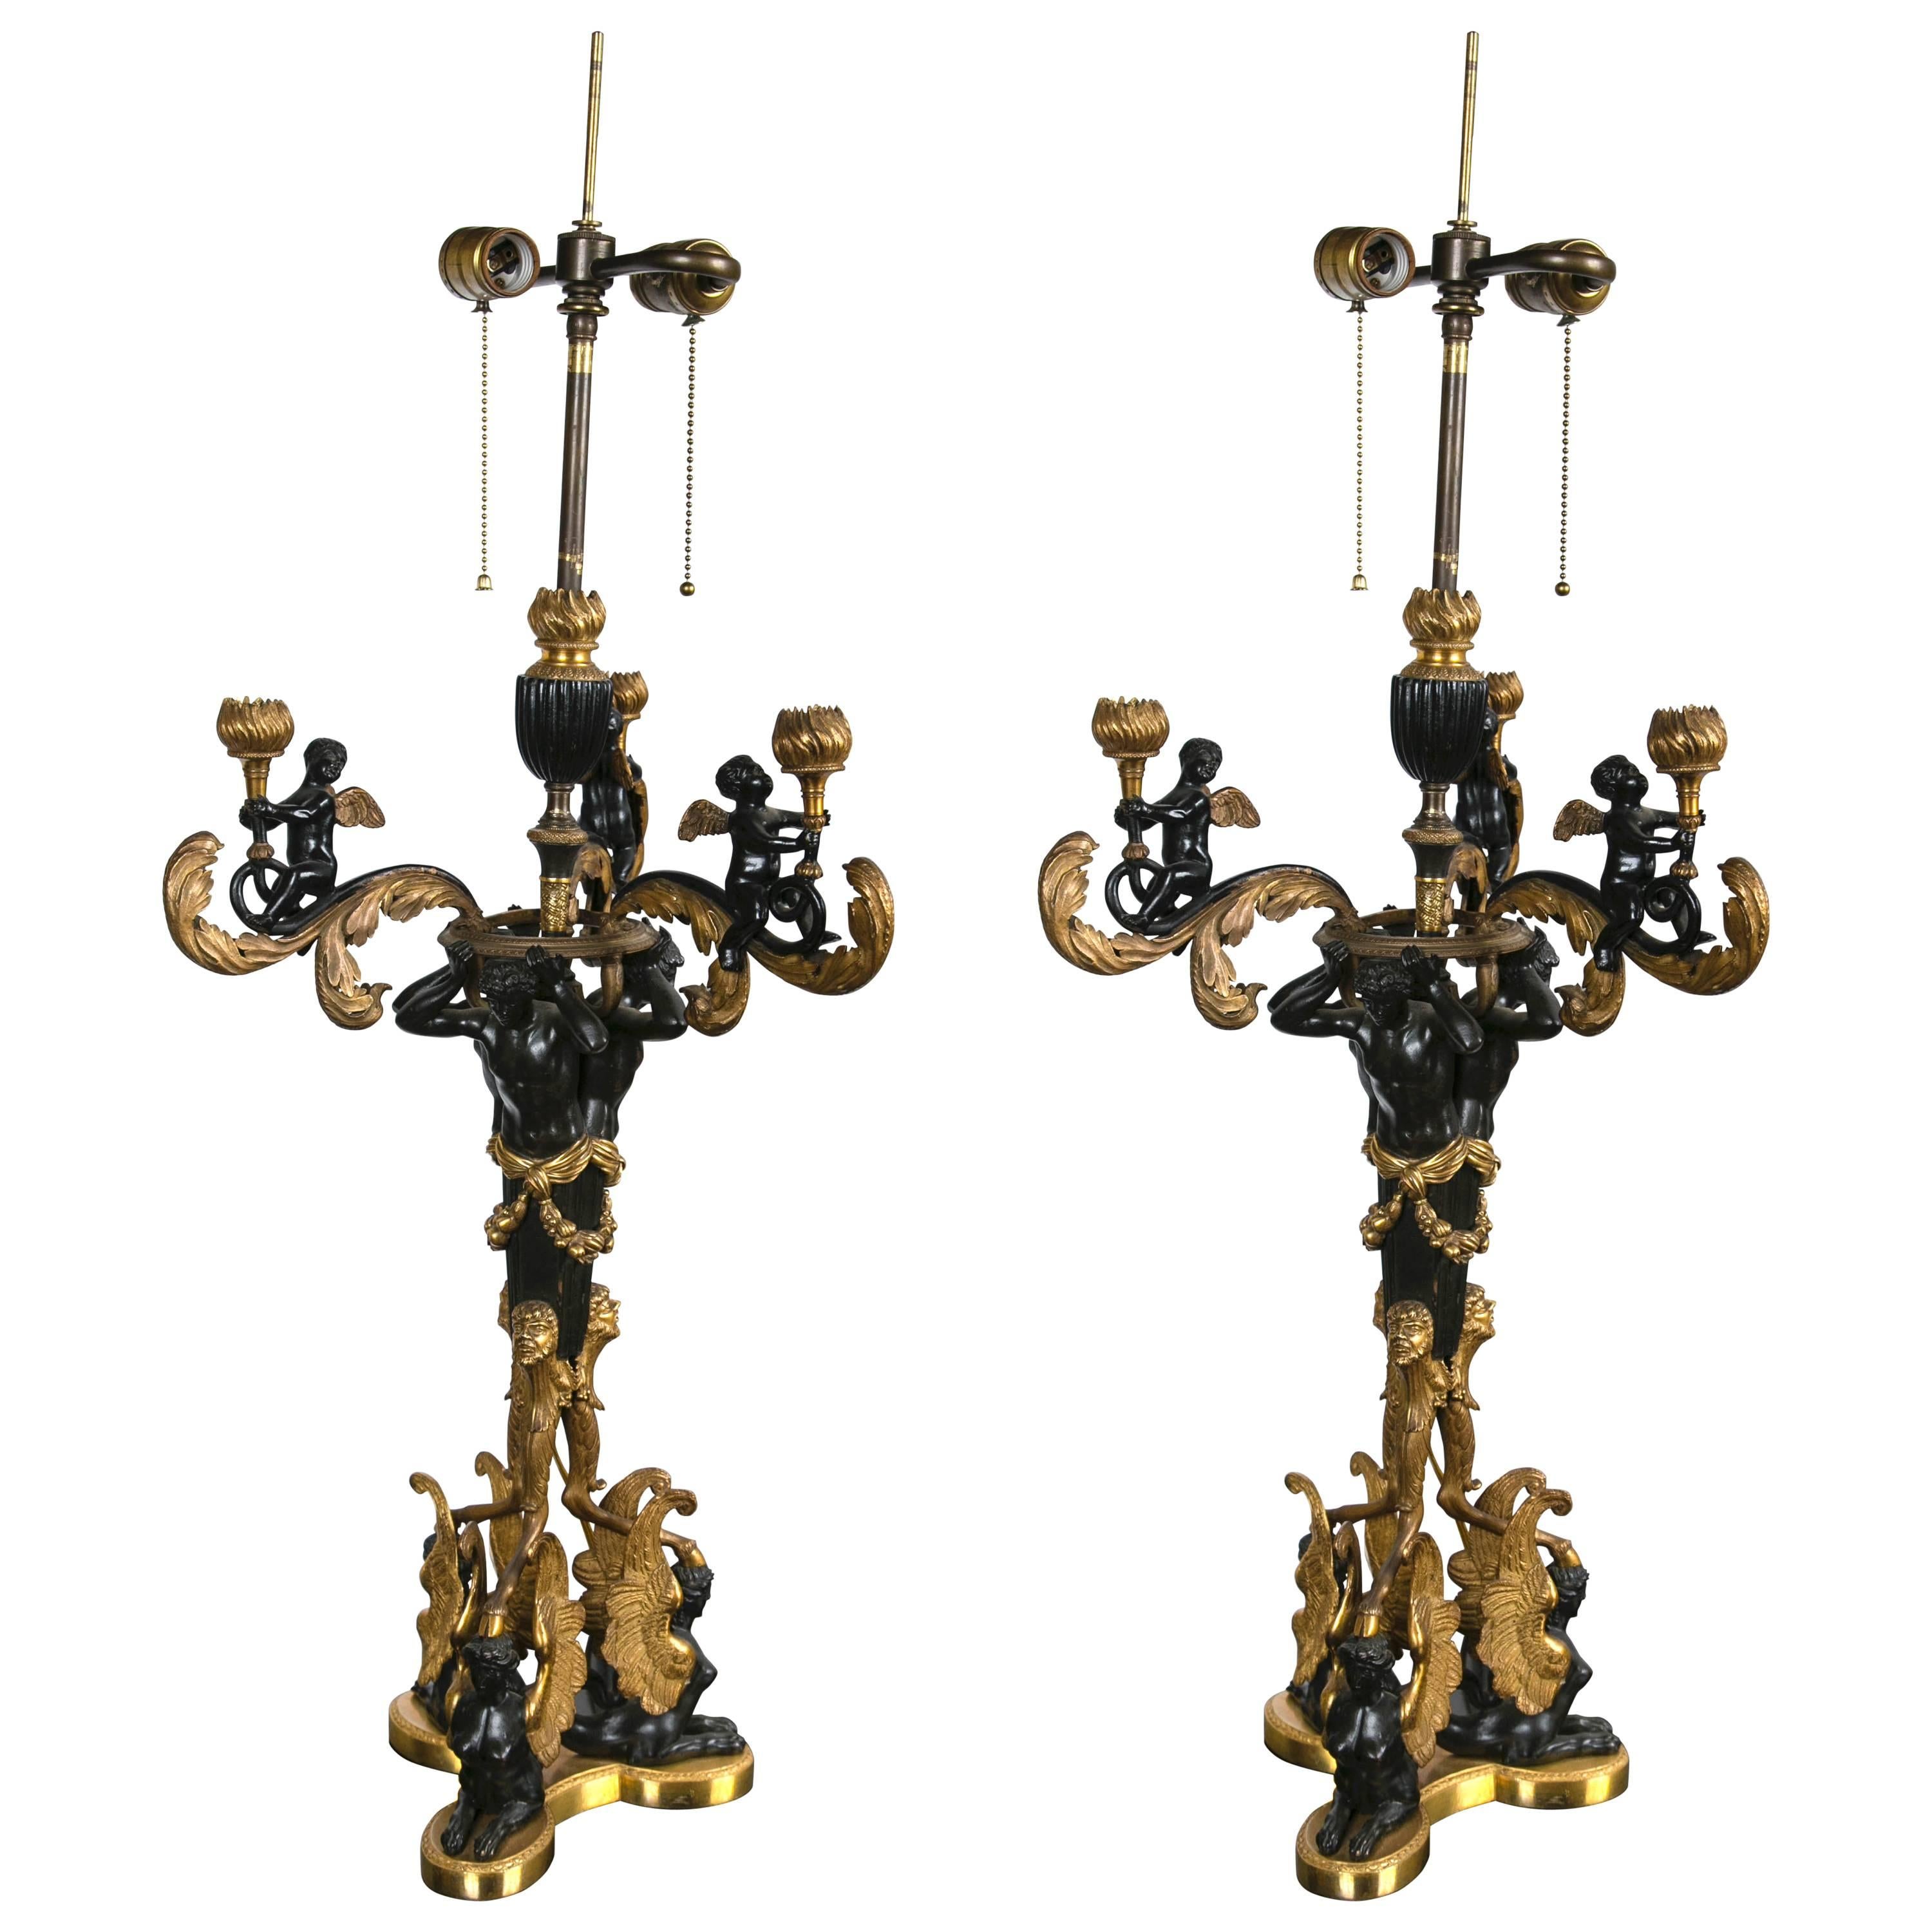 Excellent Quality Pair of Russian Gilt and Patinated Bronze Candelabra For Sale